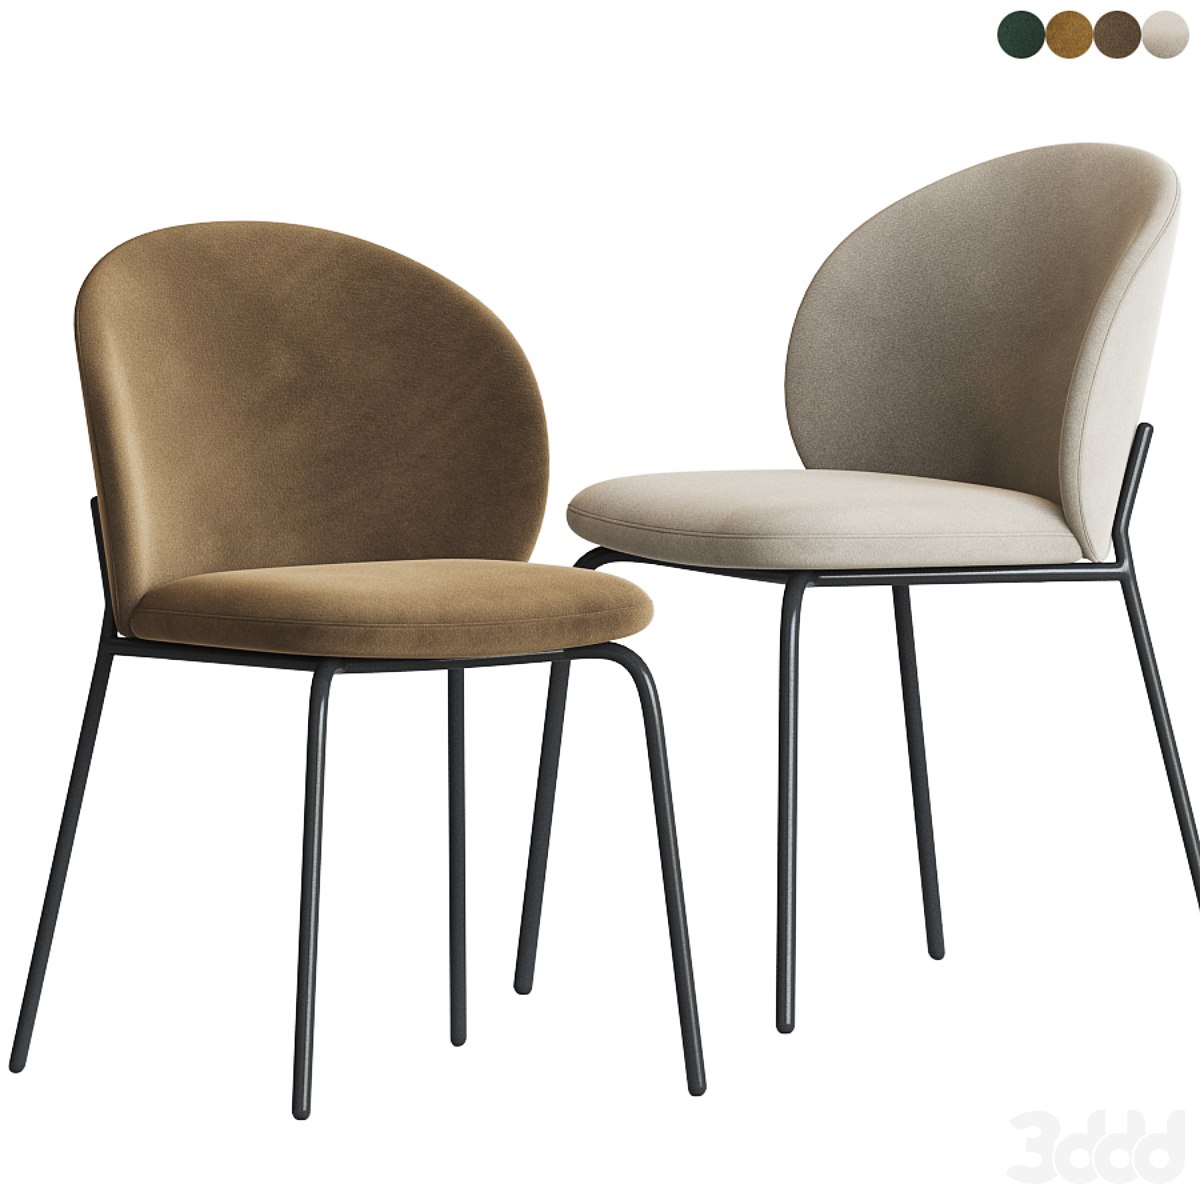 Princeton Chair by BoConcept